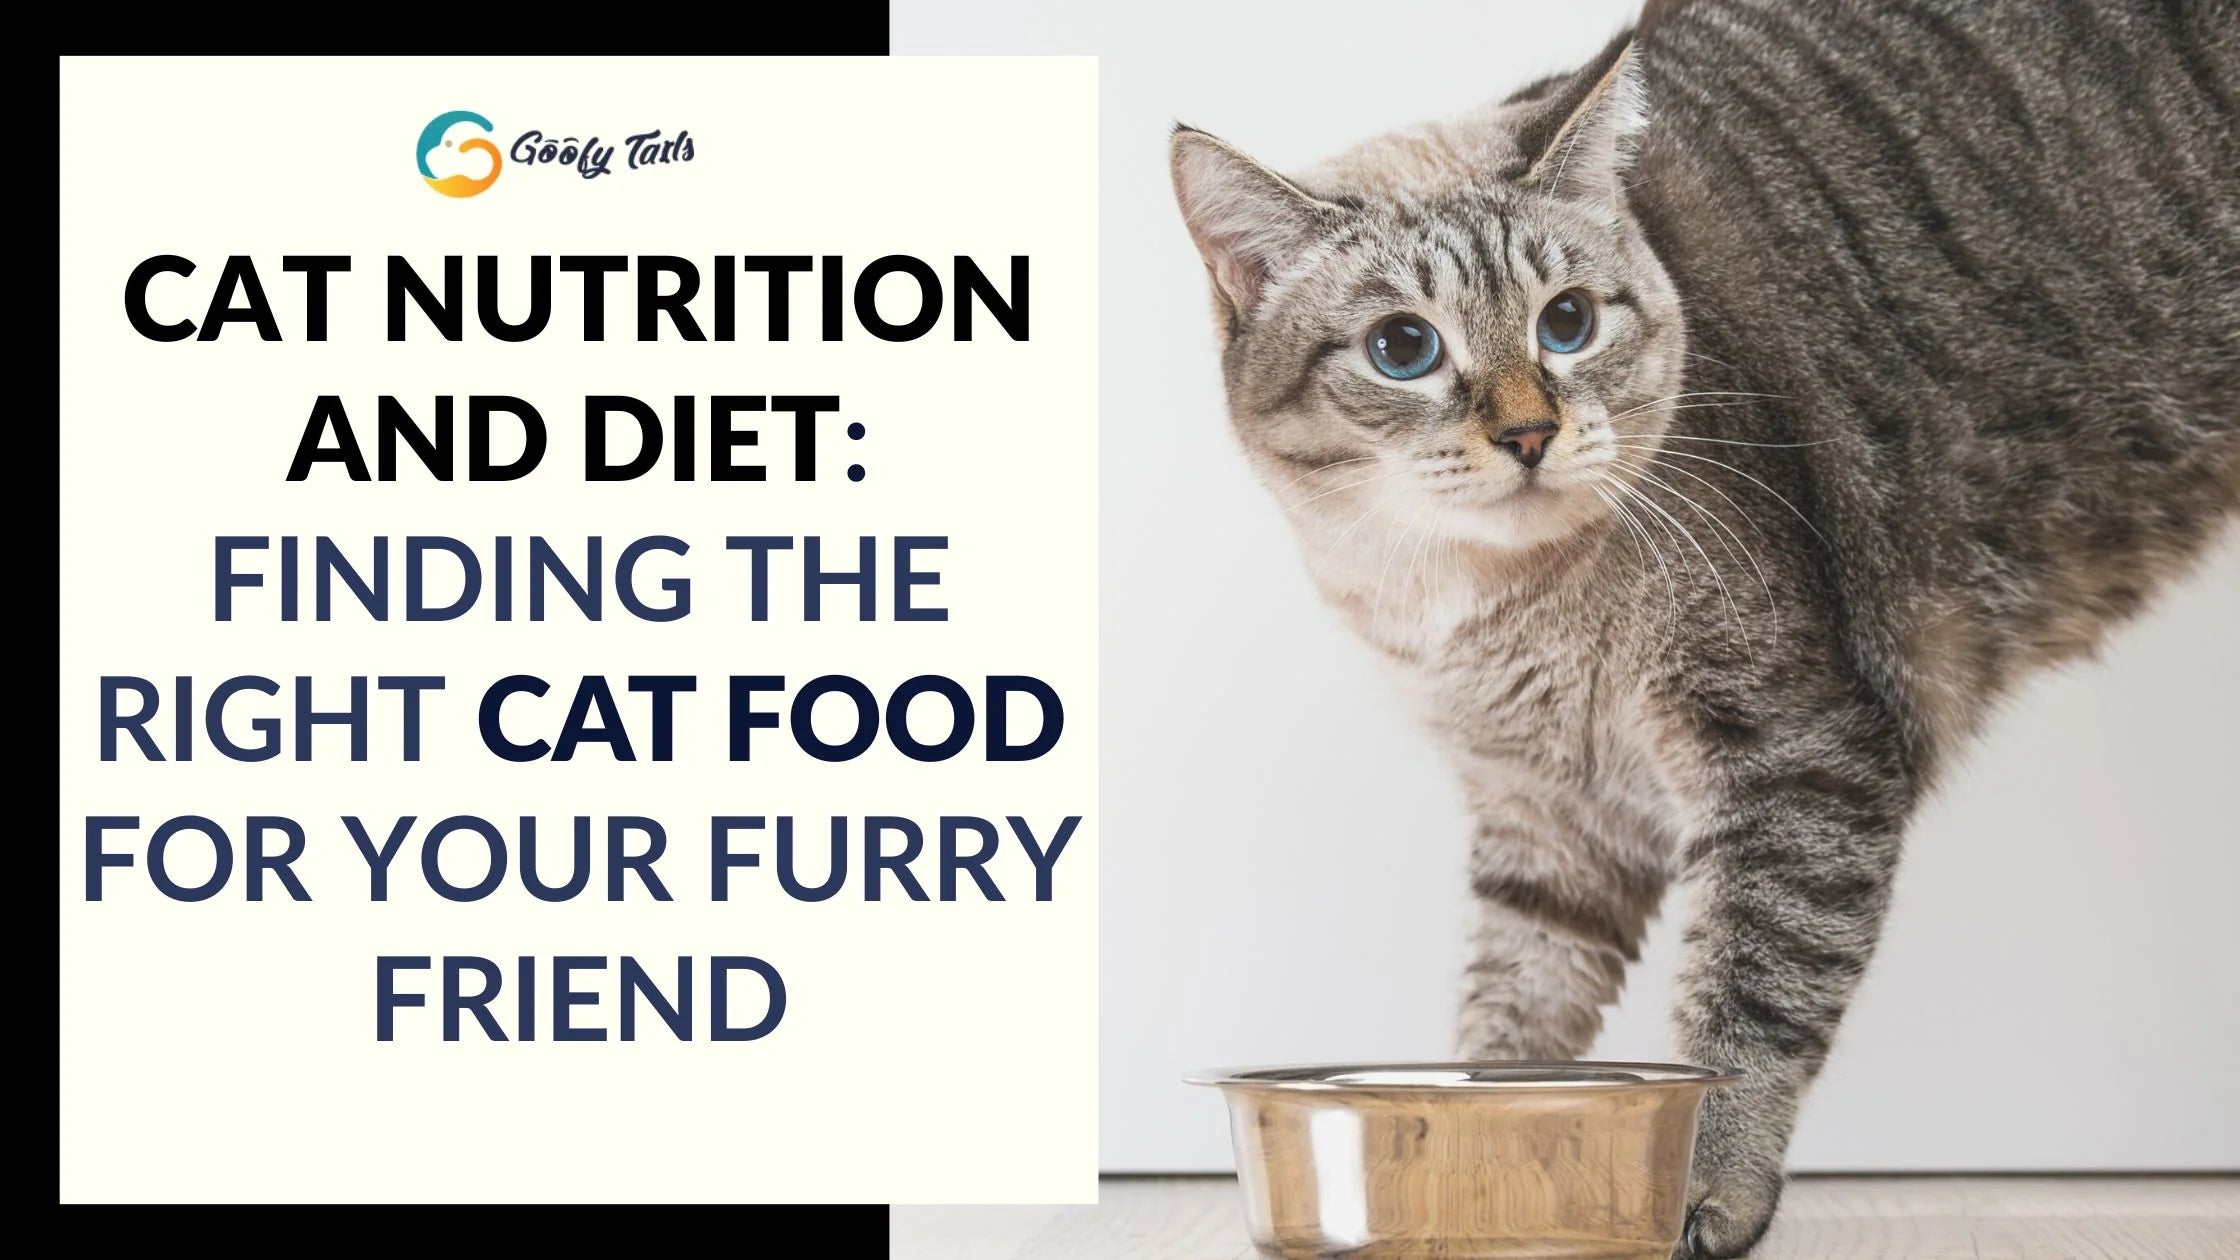 Cat Nutrition and Diet: Finding the Right Cat Food for Your Furry Friend